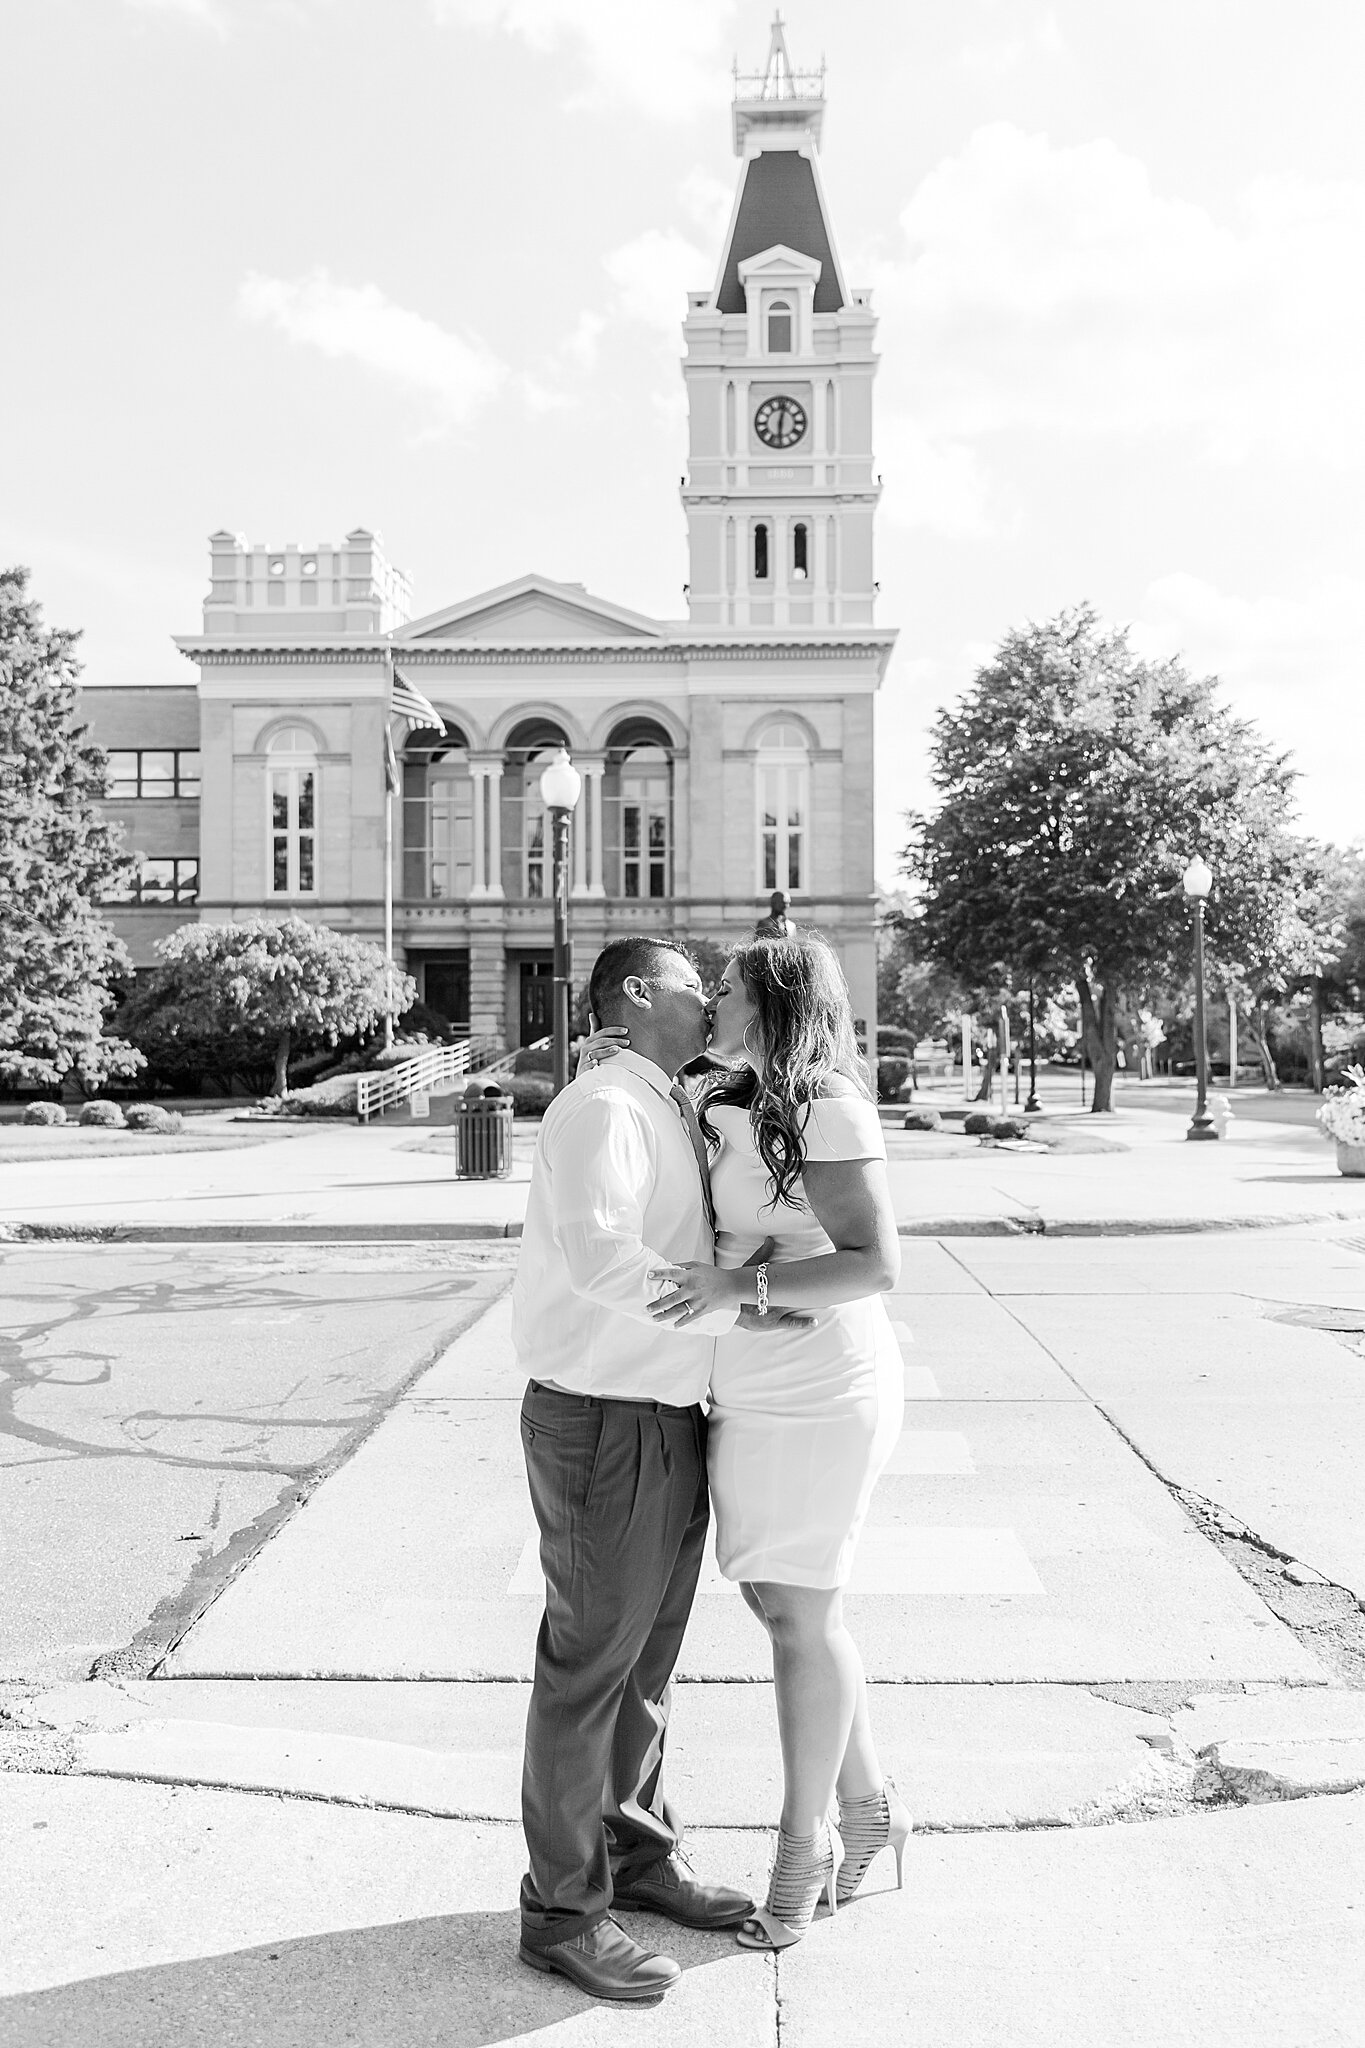 detroit-wedding-photographer-classic-engagement-photos-in-historic-downtown-monroe-mi-by-courtney-carolyn-photography_0010.jpg